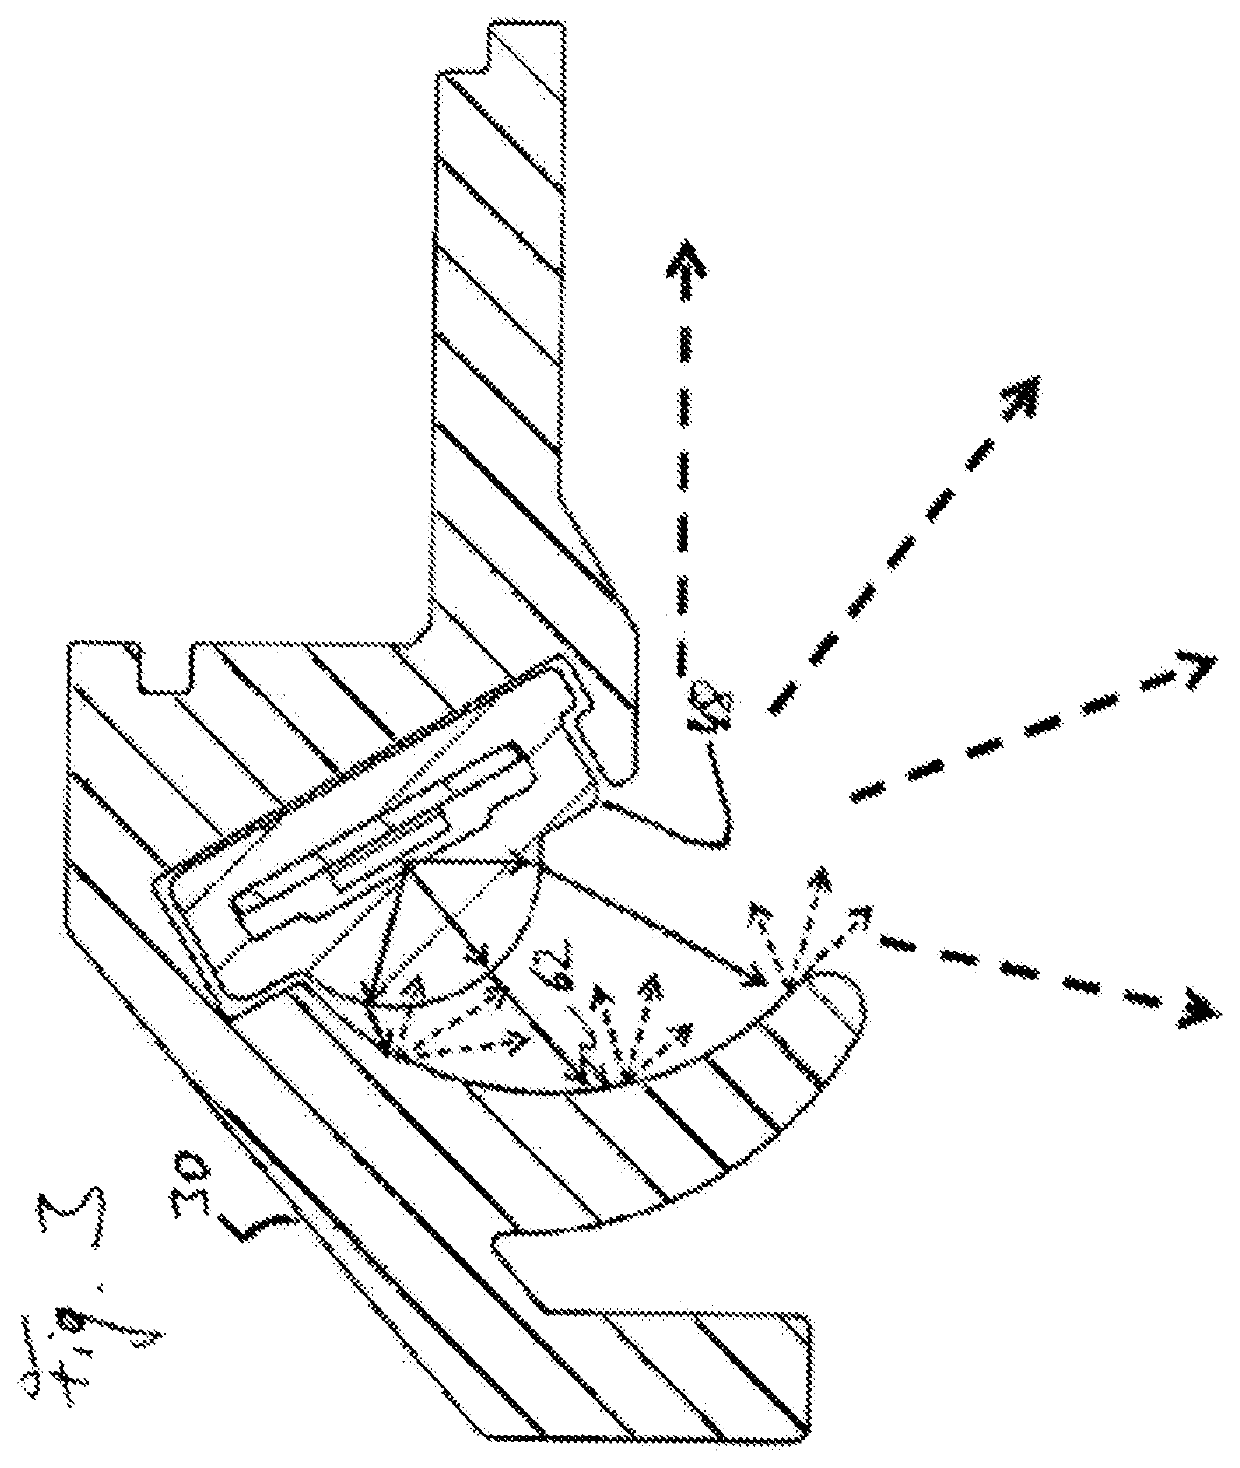 Shelf with lighting function for a domestic cooling device